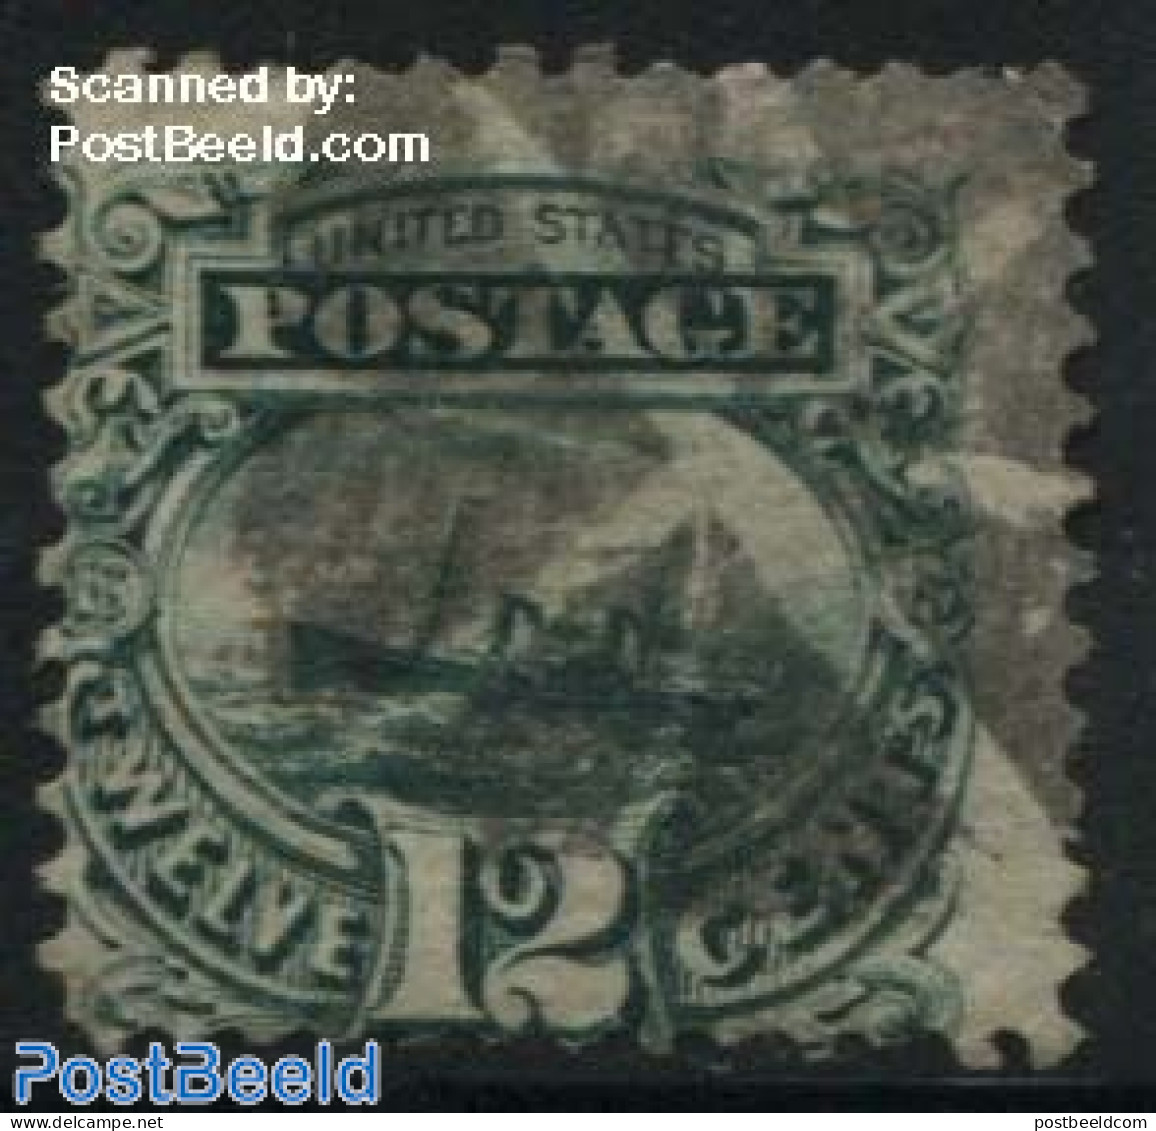 United States Of America 1869 12c Green, Used, Used Stamps, Transport - Ships And Boats - Oblitérés